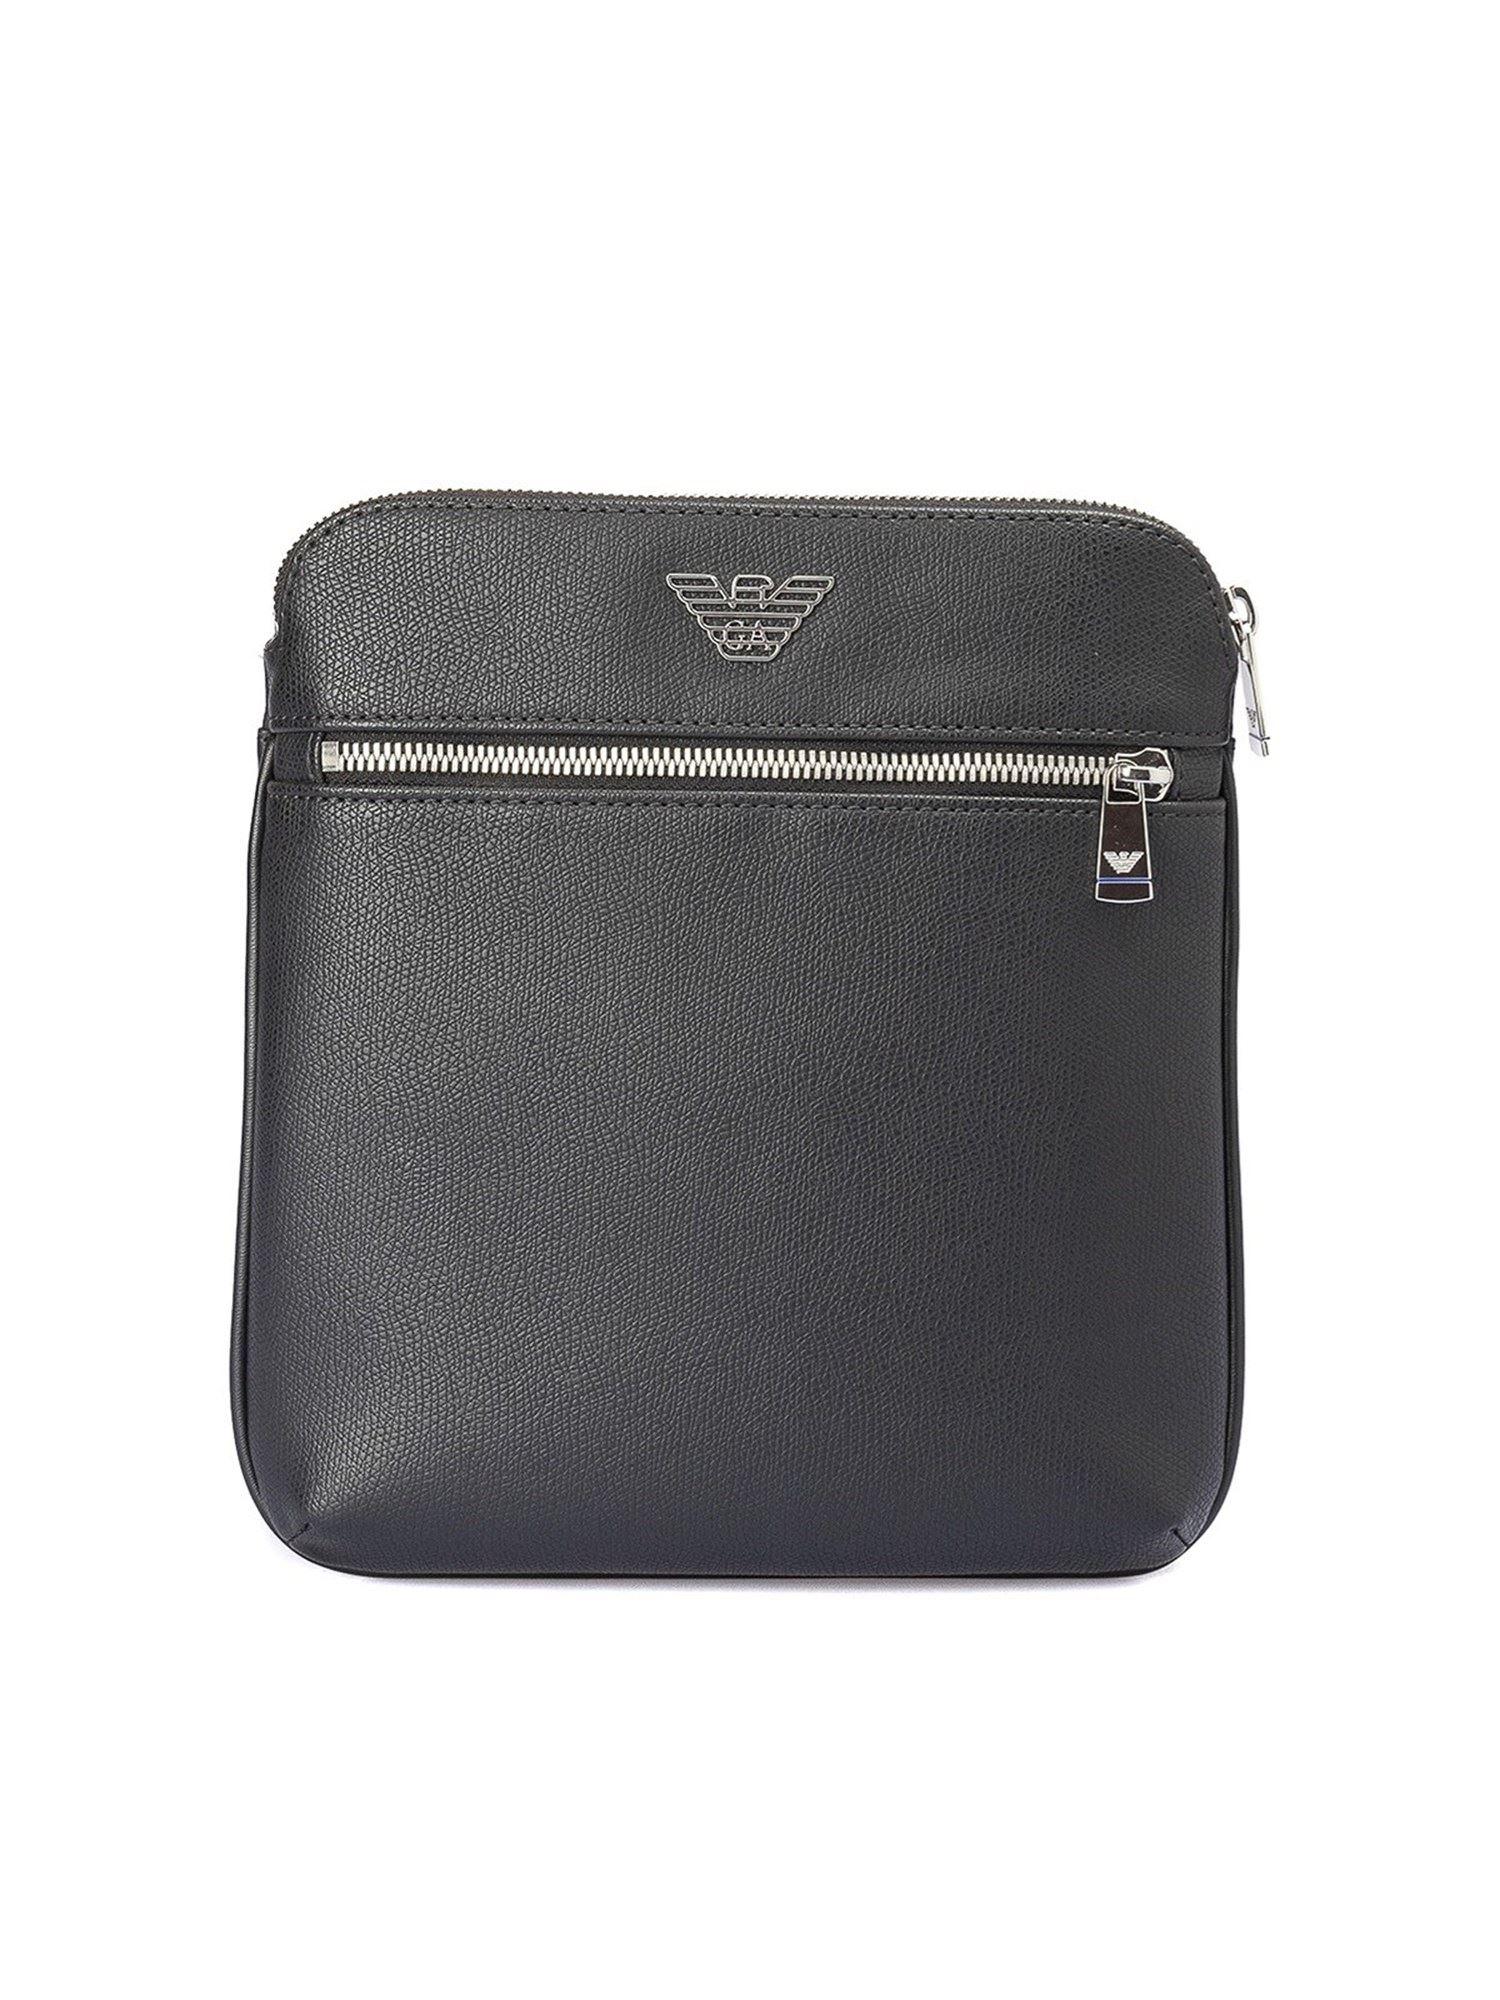 Emporio Armani Faux Leather Small Messenger Bag in Black for Men - Lyst